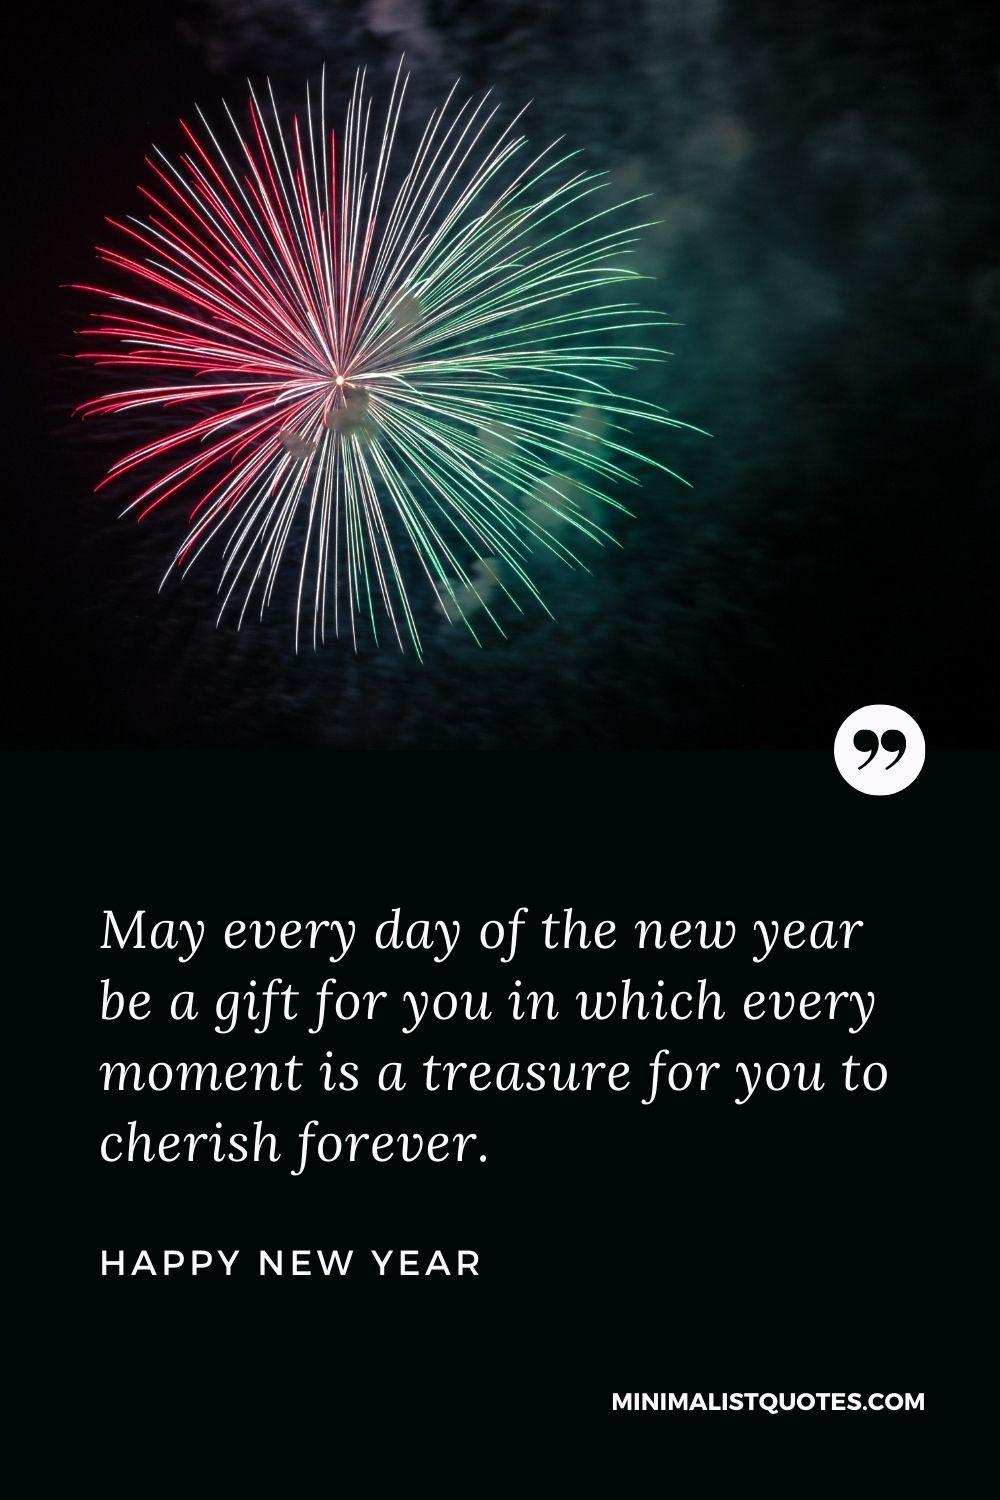 New Year Wish - May every day of the new year be a gift for you in which every moment is a treasure for you to cherish forever.